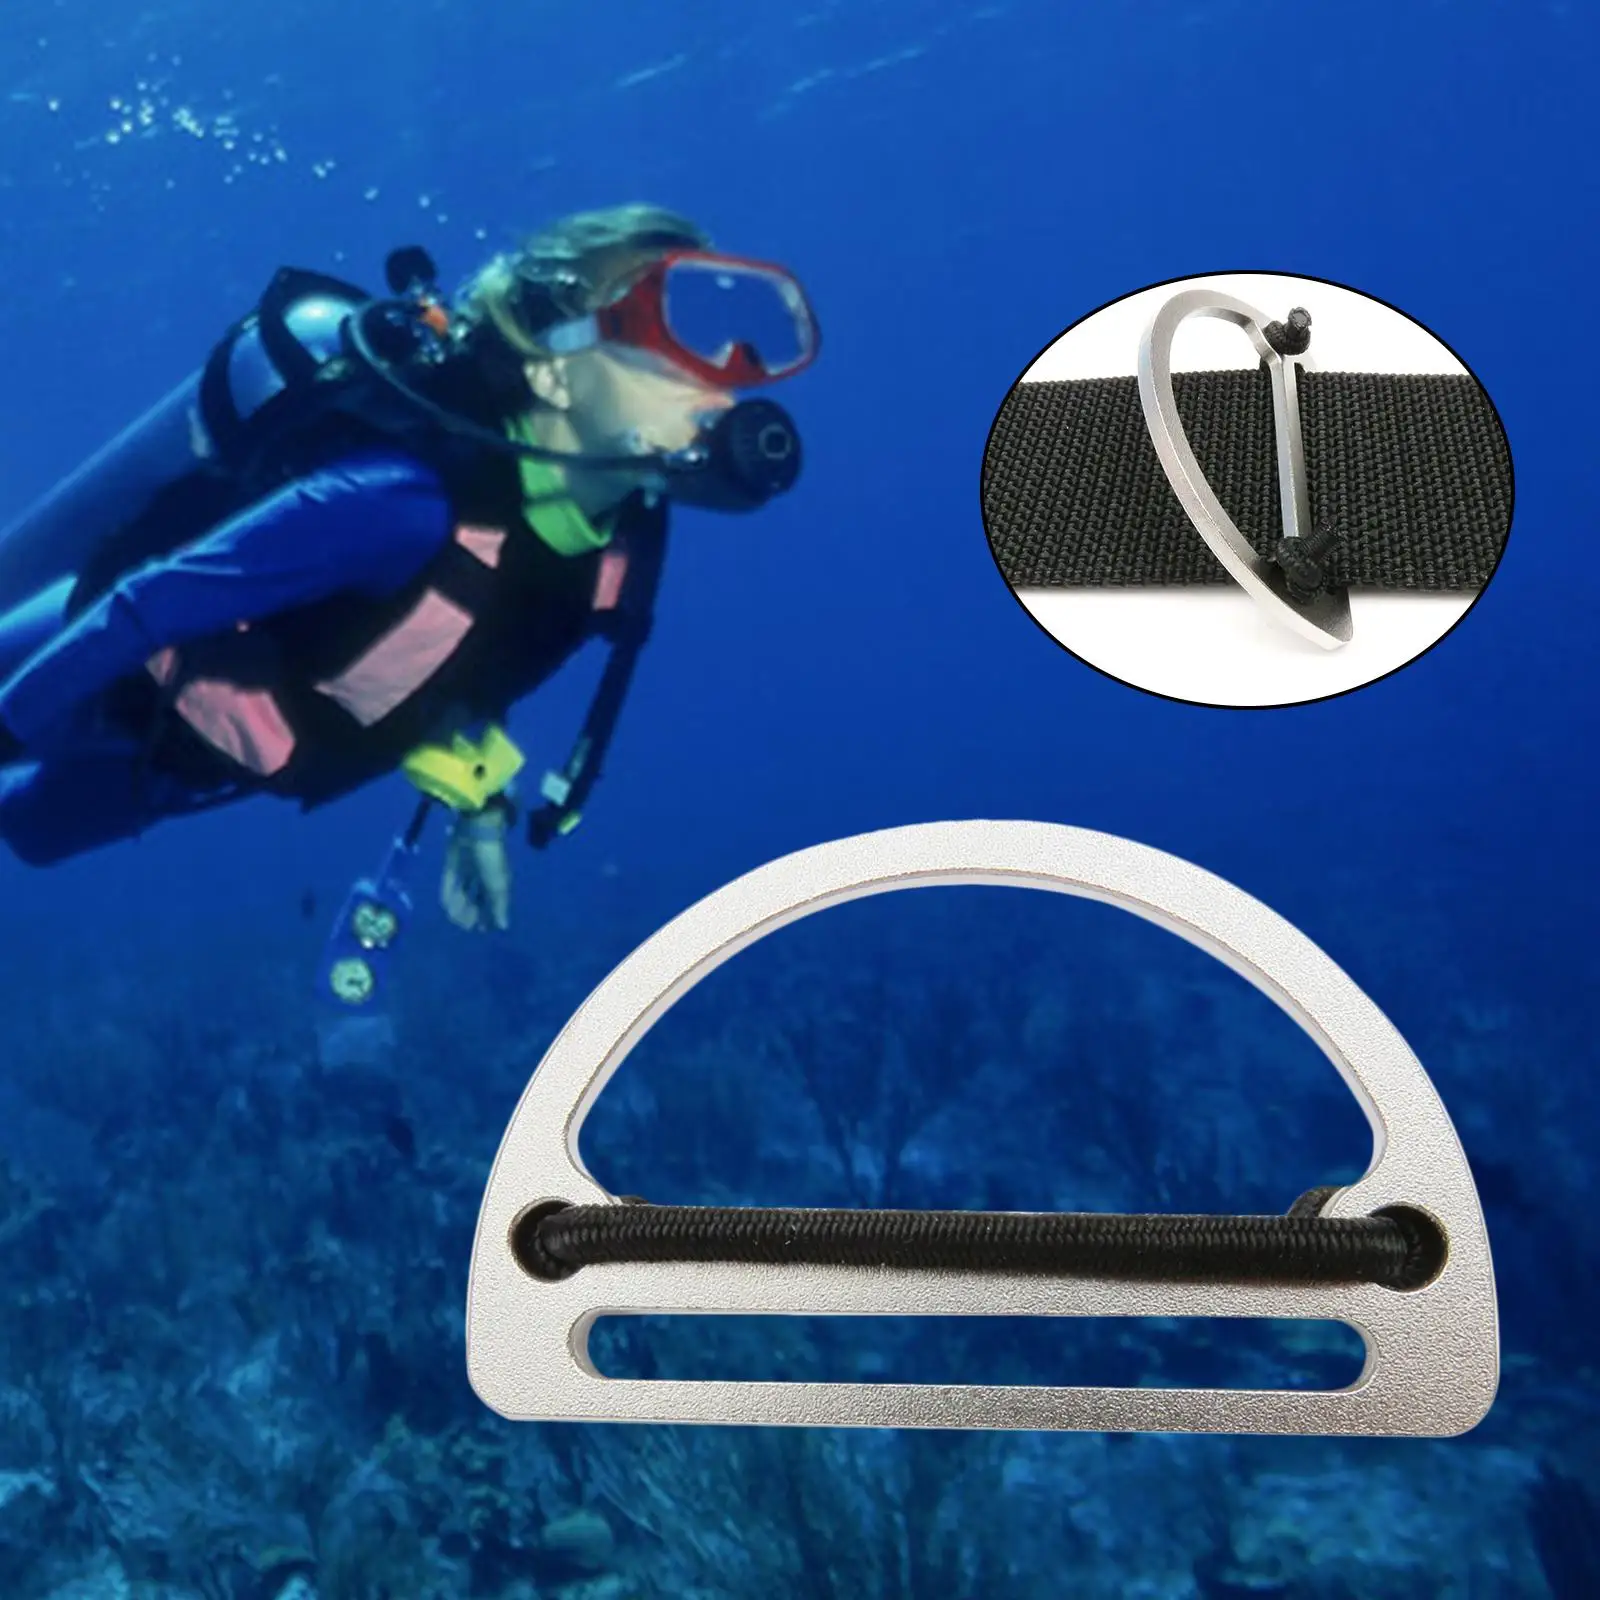 Weight  Bent D , Retainer, Stopper, BCD Accessories, for Webbing 50mm Weight Belt Swimming Surfing Scuba Diving